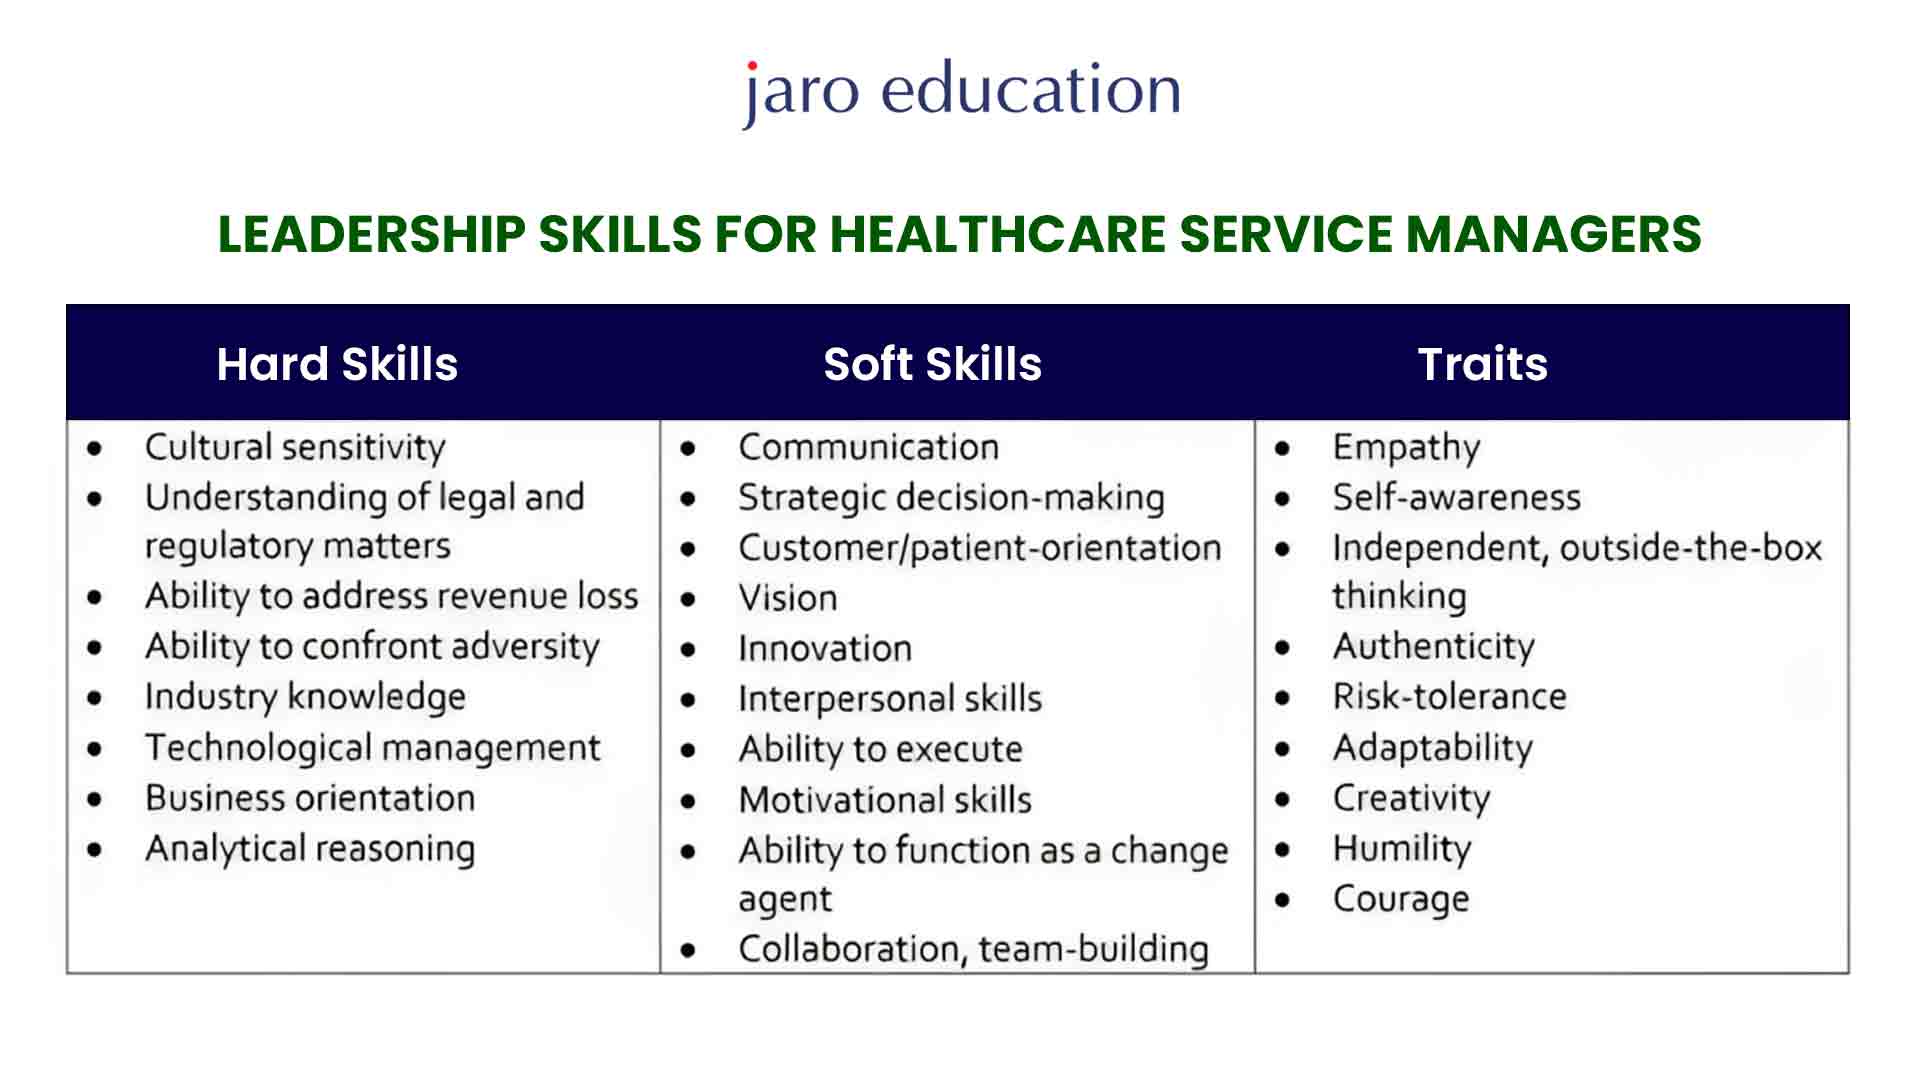 Leadership Skills for Healthcare Service Managers